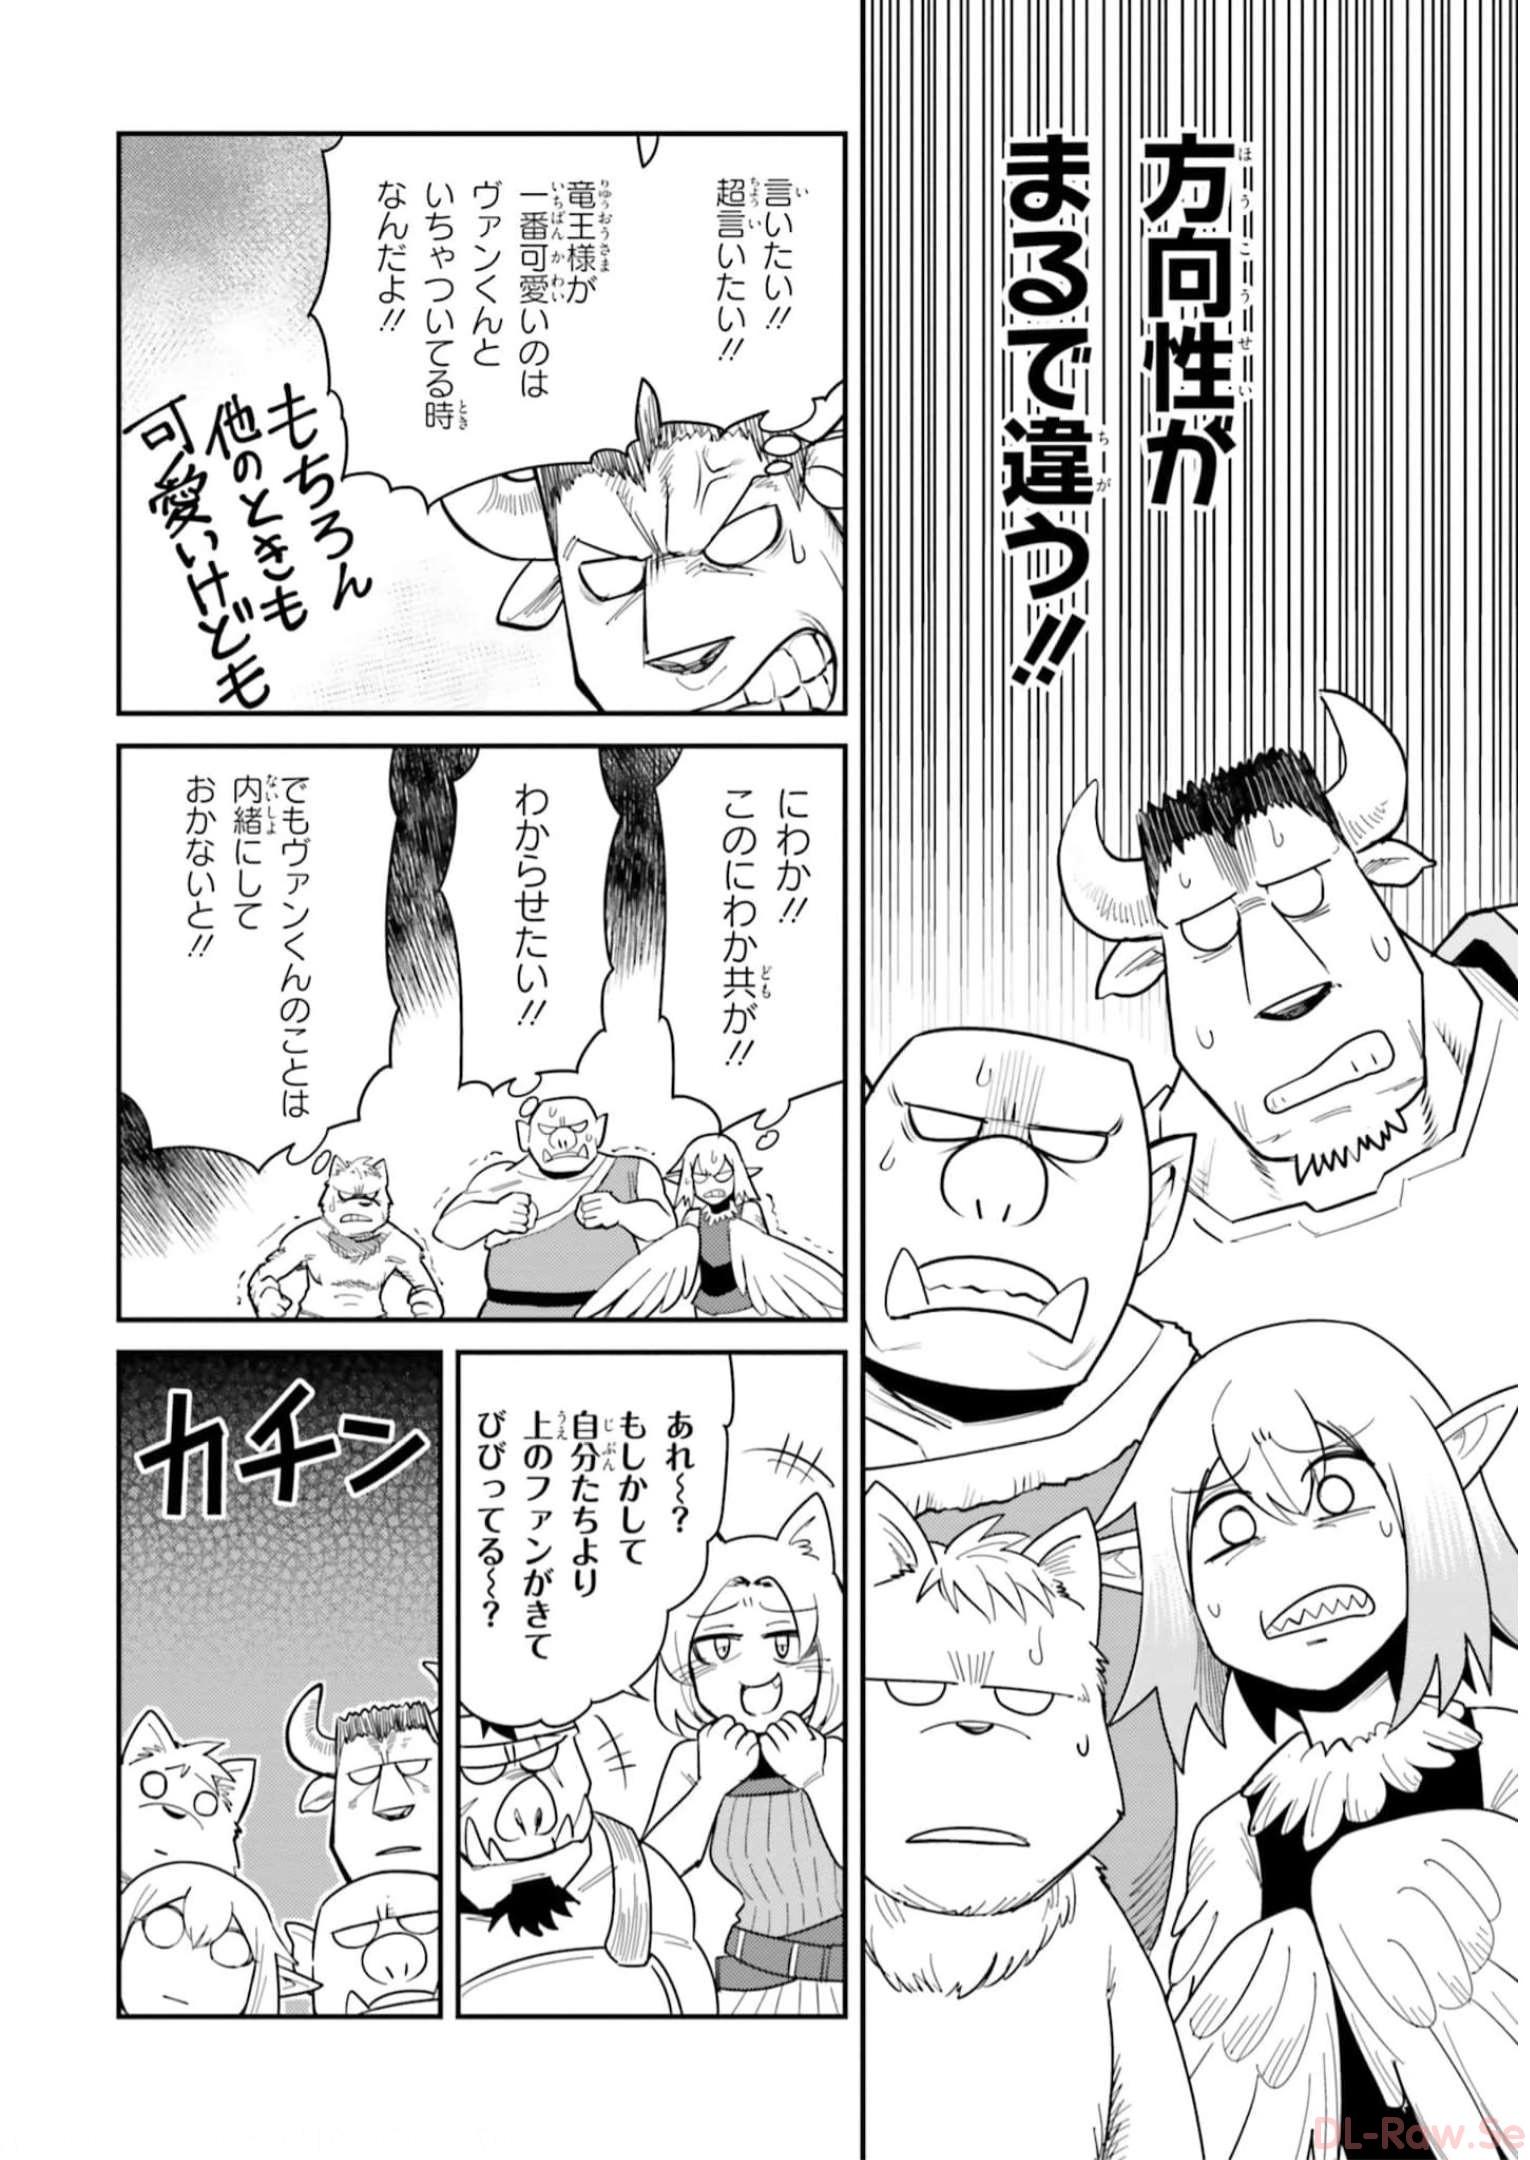 Dungeon Friends Forever Dungeon’s Childhood Friend ダンジョンの幼なじみ 第18話 - Page 14